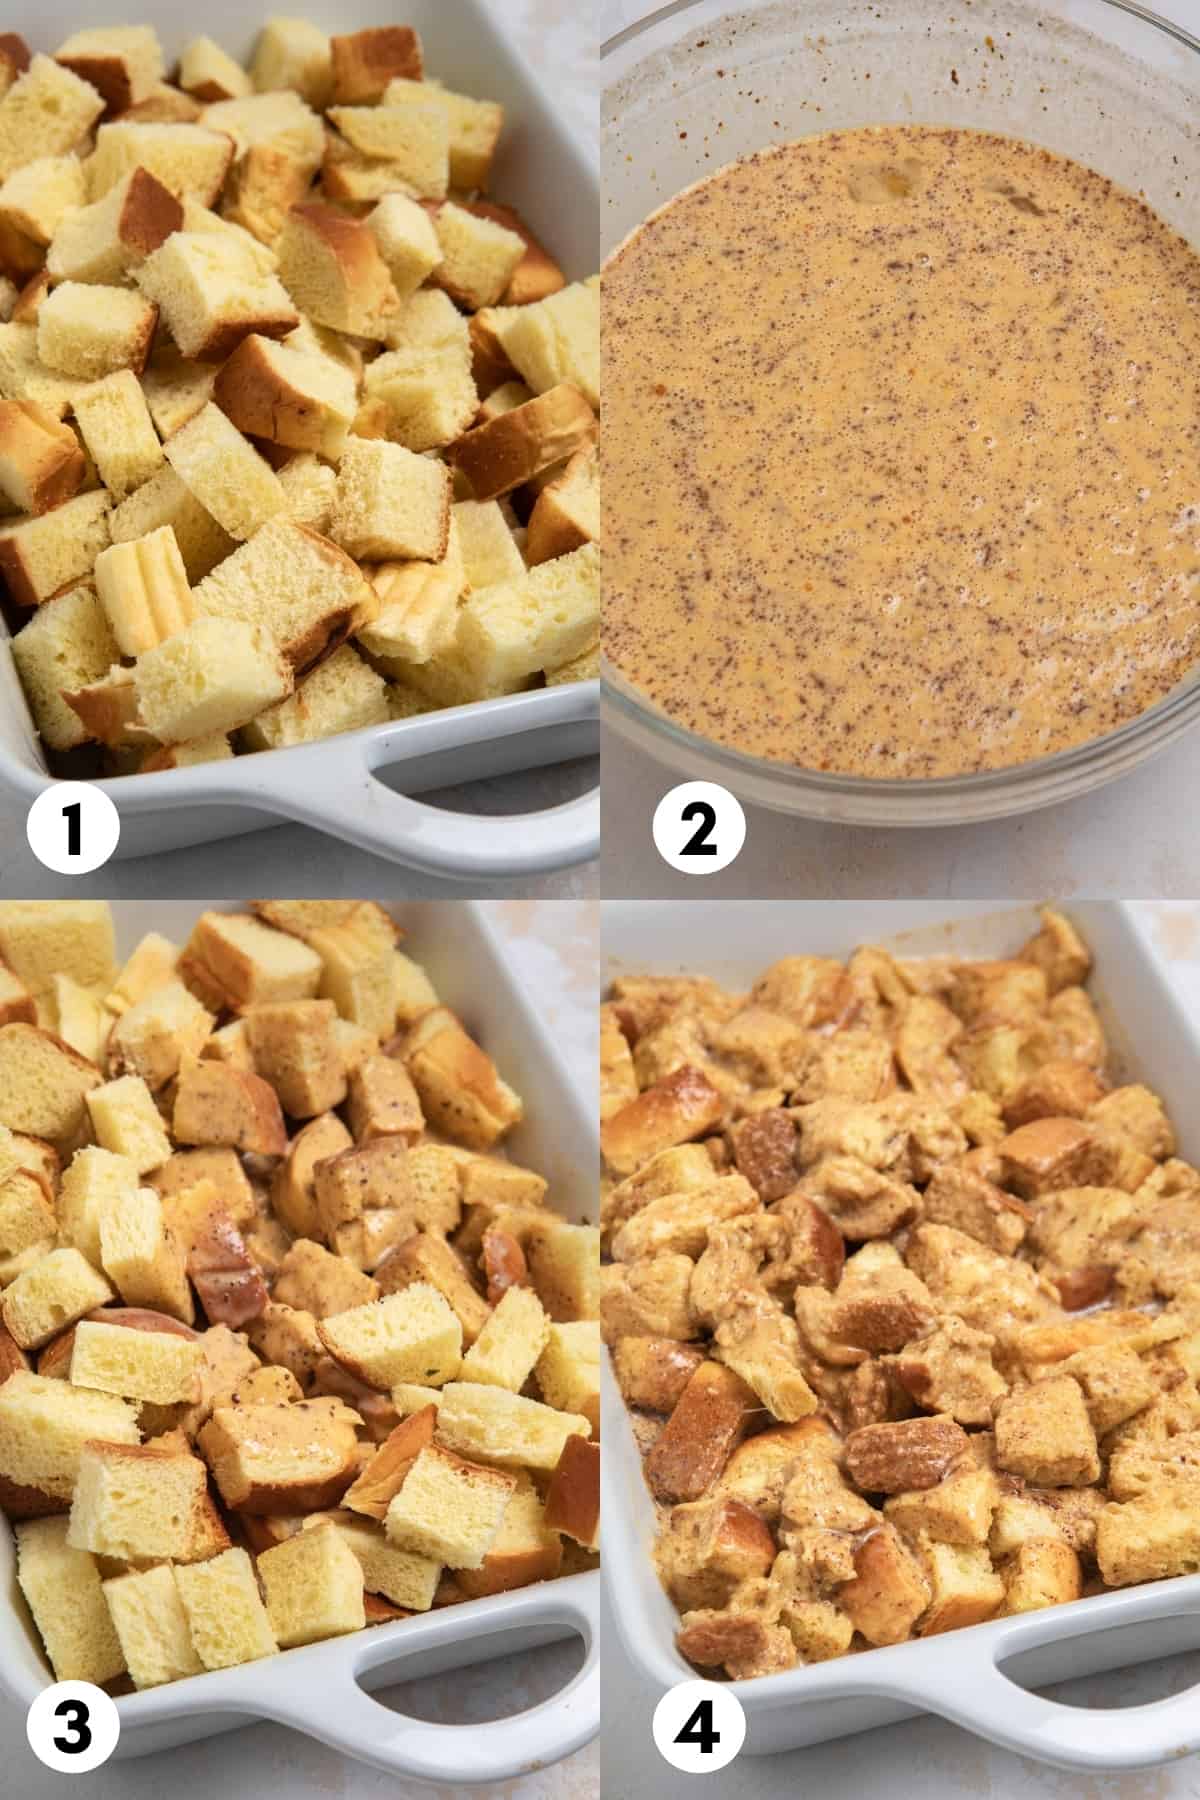 Steps to make pumpkin French Toast bake including cut pieces of bread in dish and then batter mixed in.